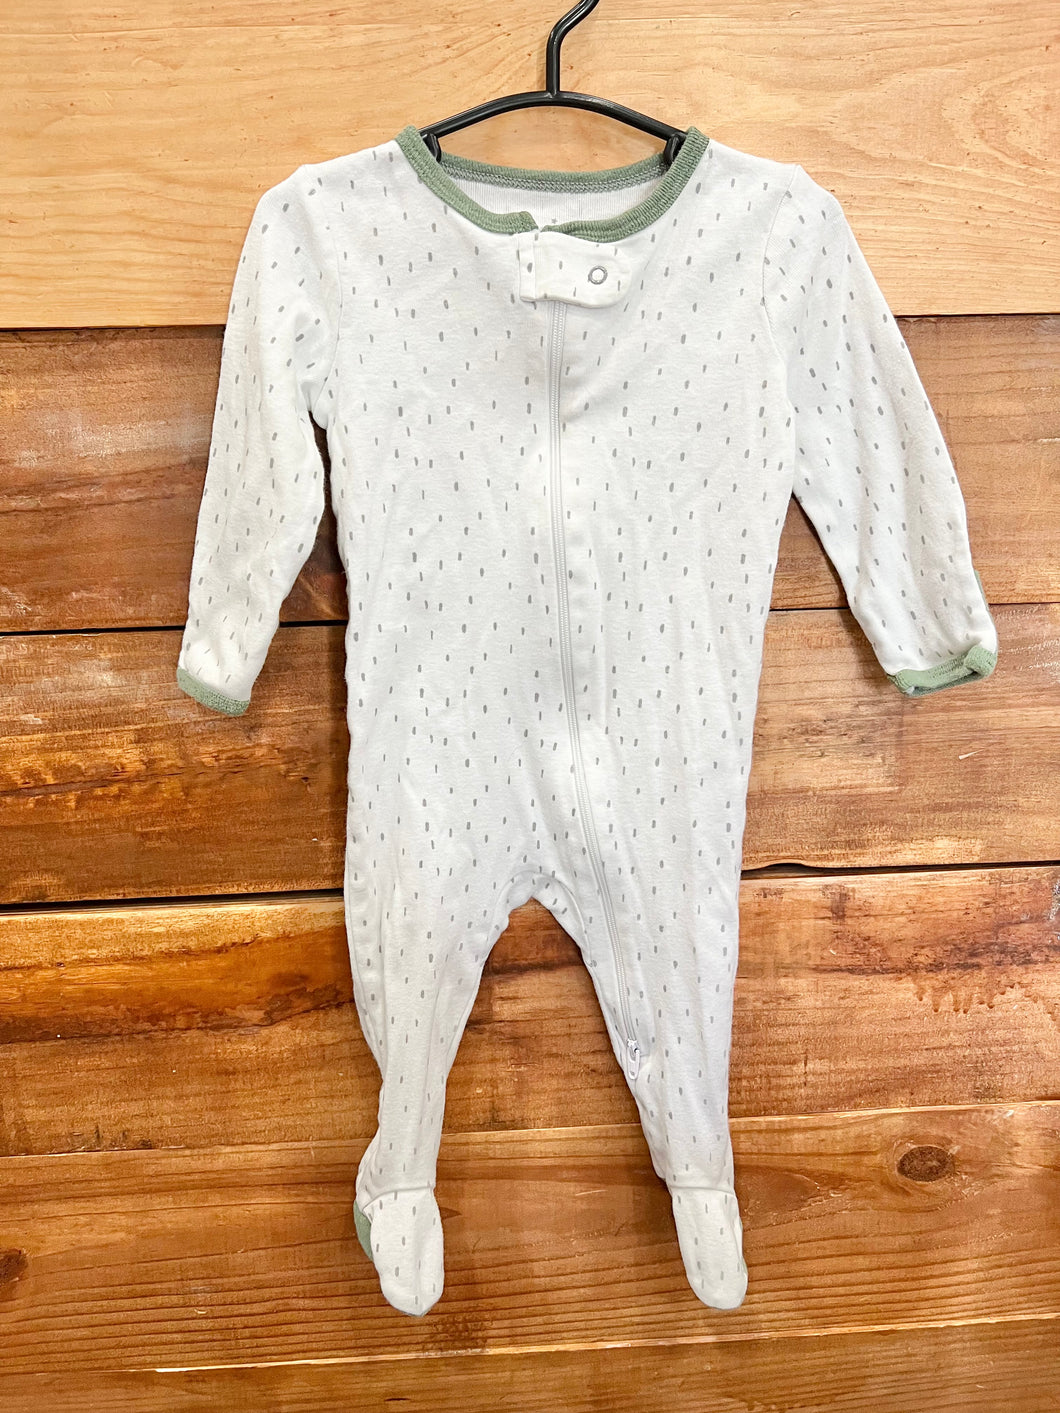 Cloud Island Green Dotted Footie Size 3-6m